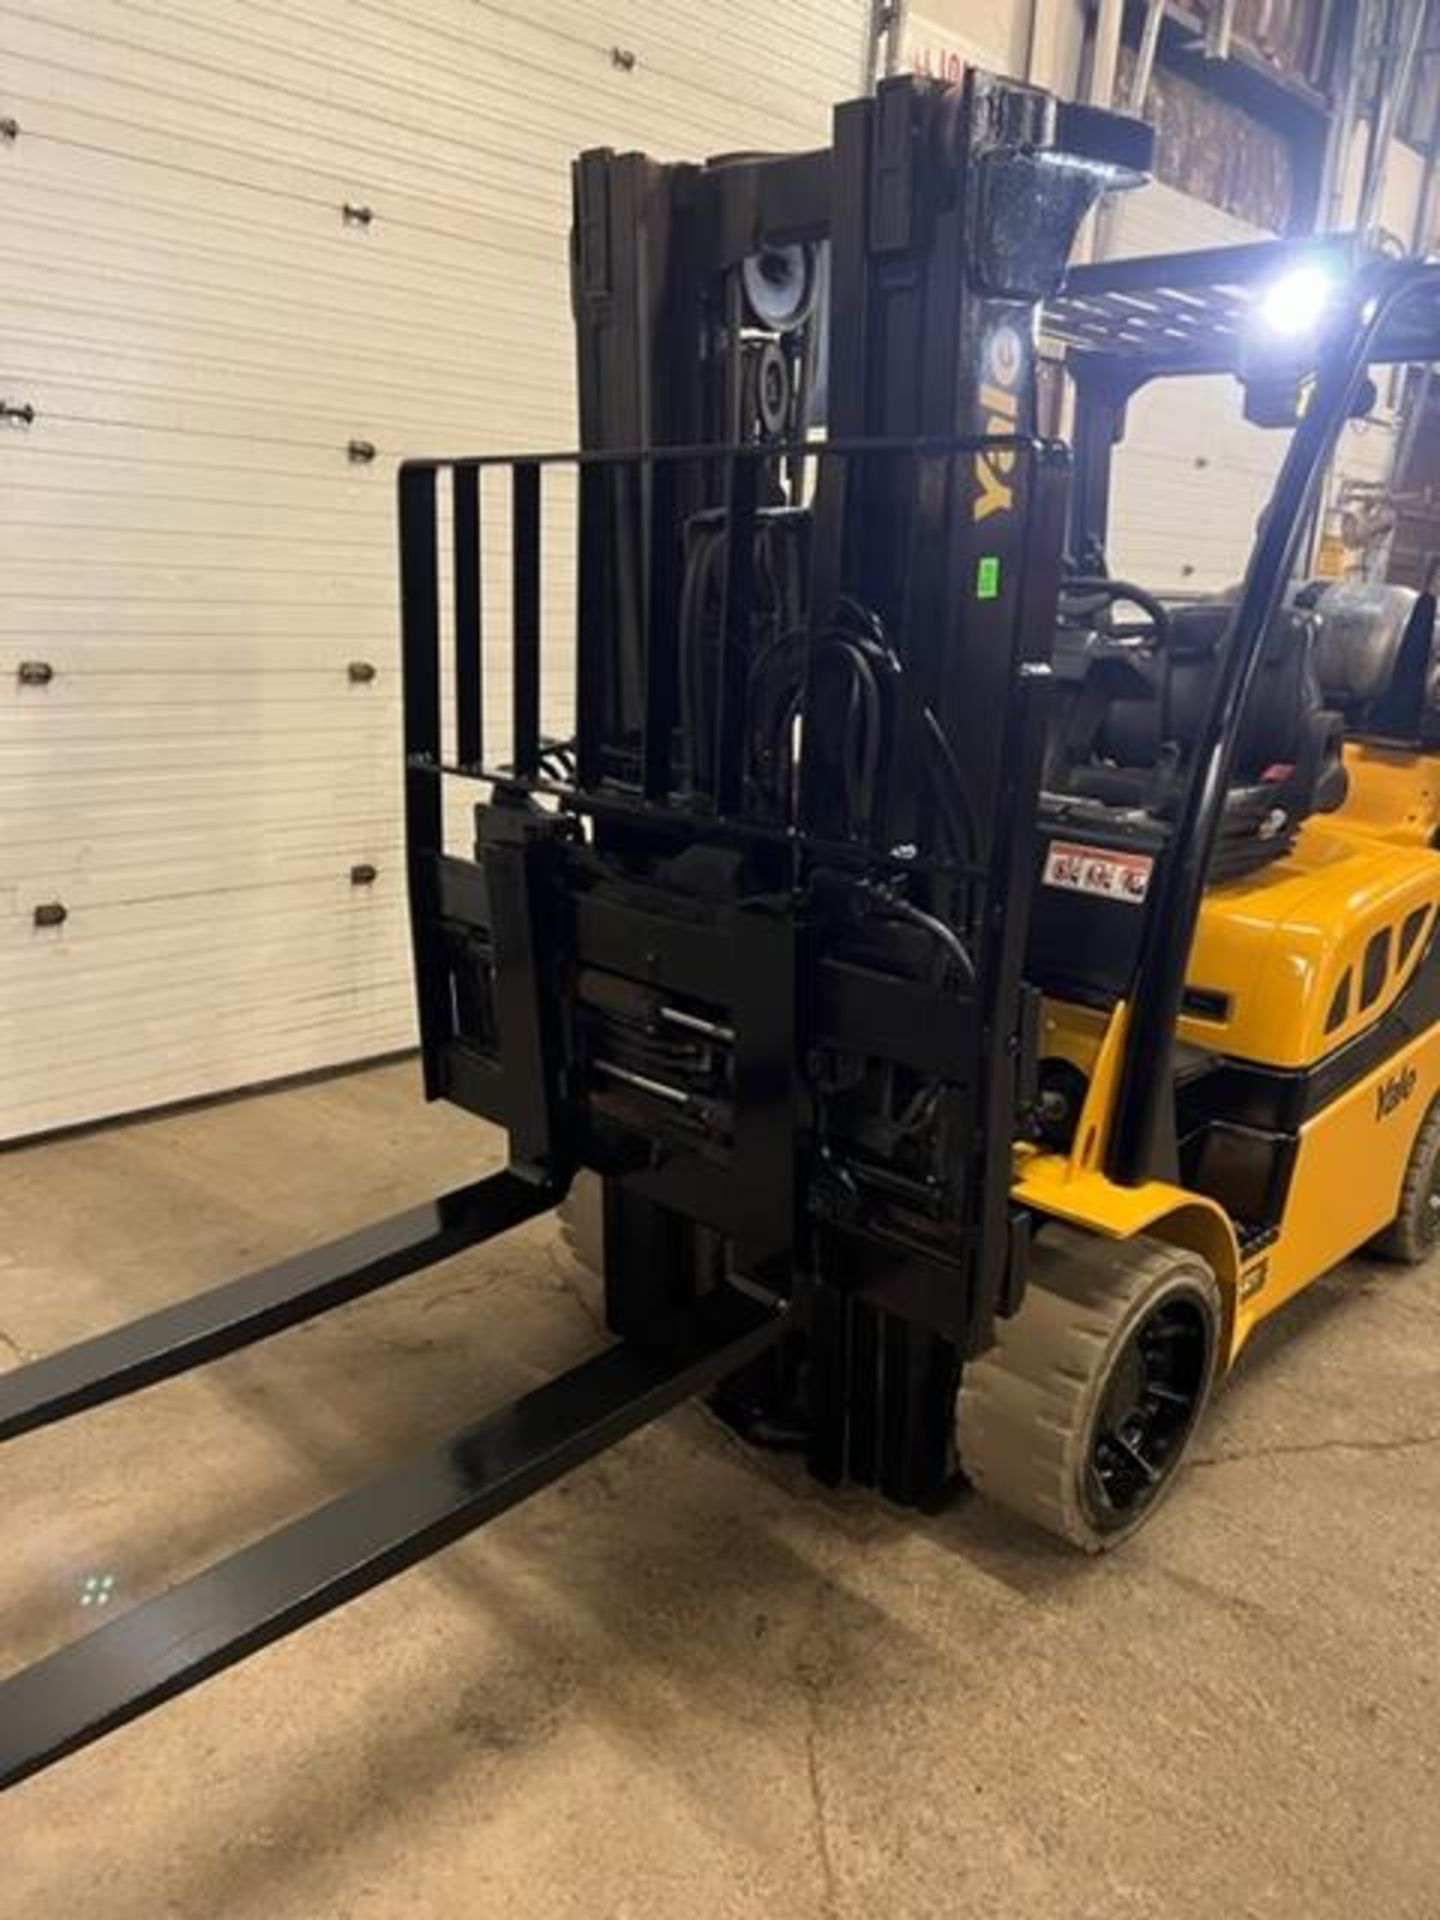 FREE CUSTOMS - NICE 2017 Yale model 80 - 8,000lbs Capacity Forklift LPG (propane) with 54" forks - Image 3 of 4